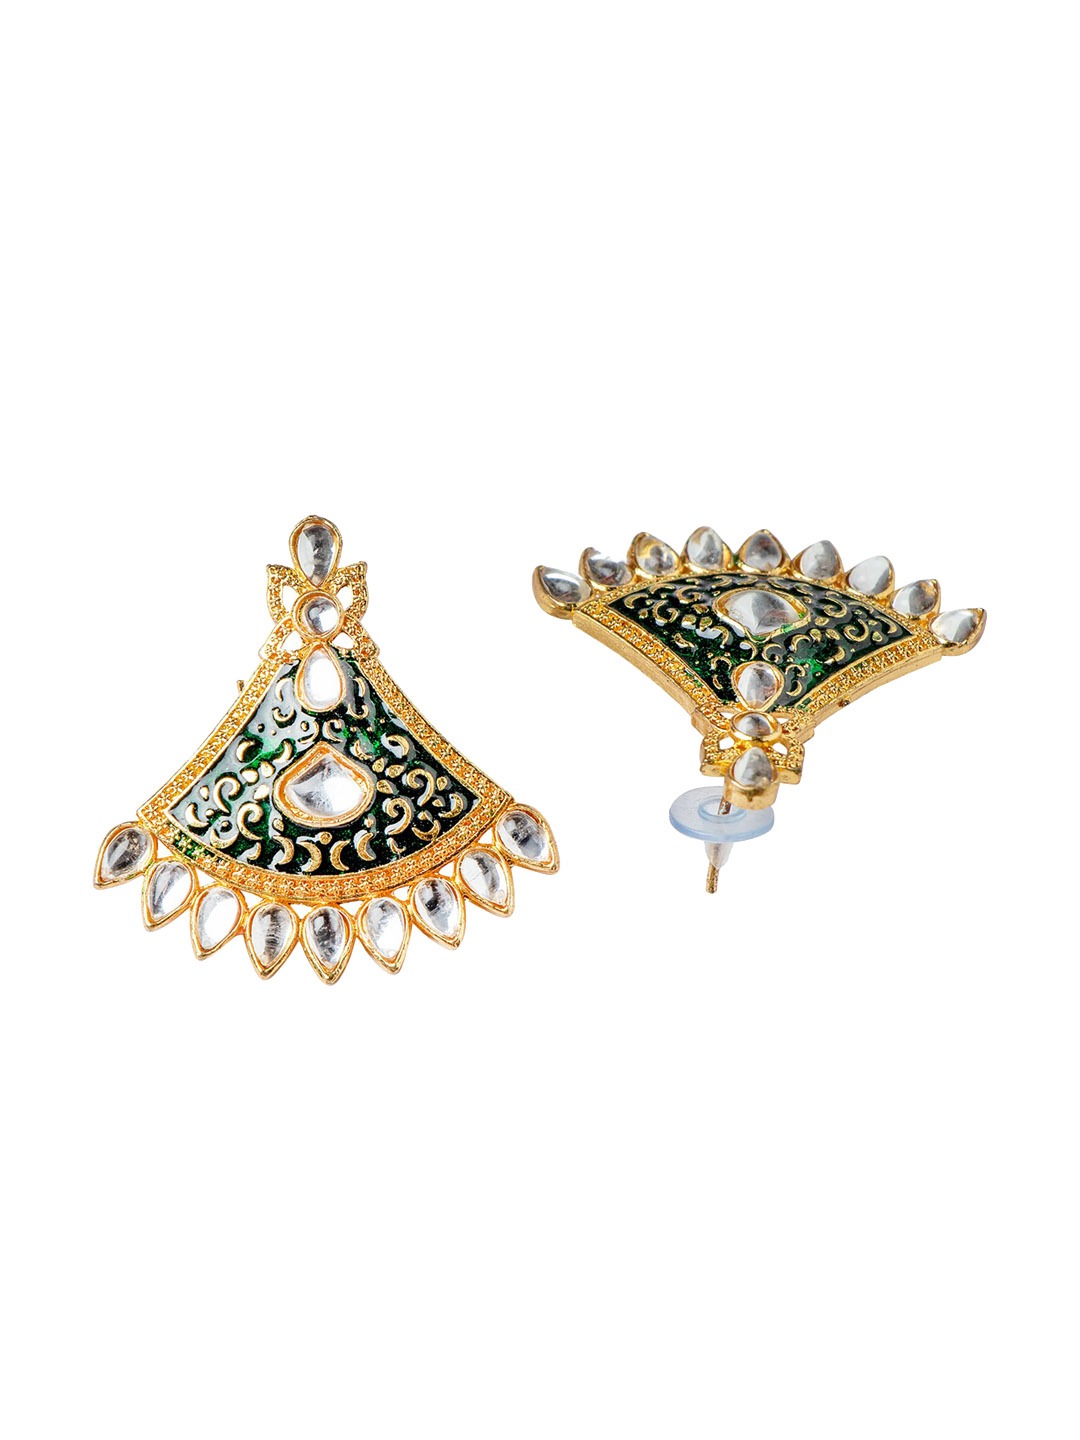 Women's Gold-Plated Green & White Stone-Studded & Pearl Beaded Jewellery Set - Morkanth